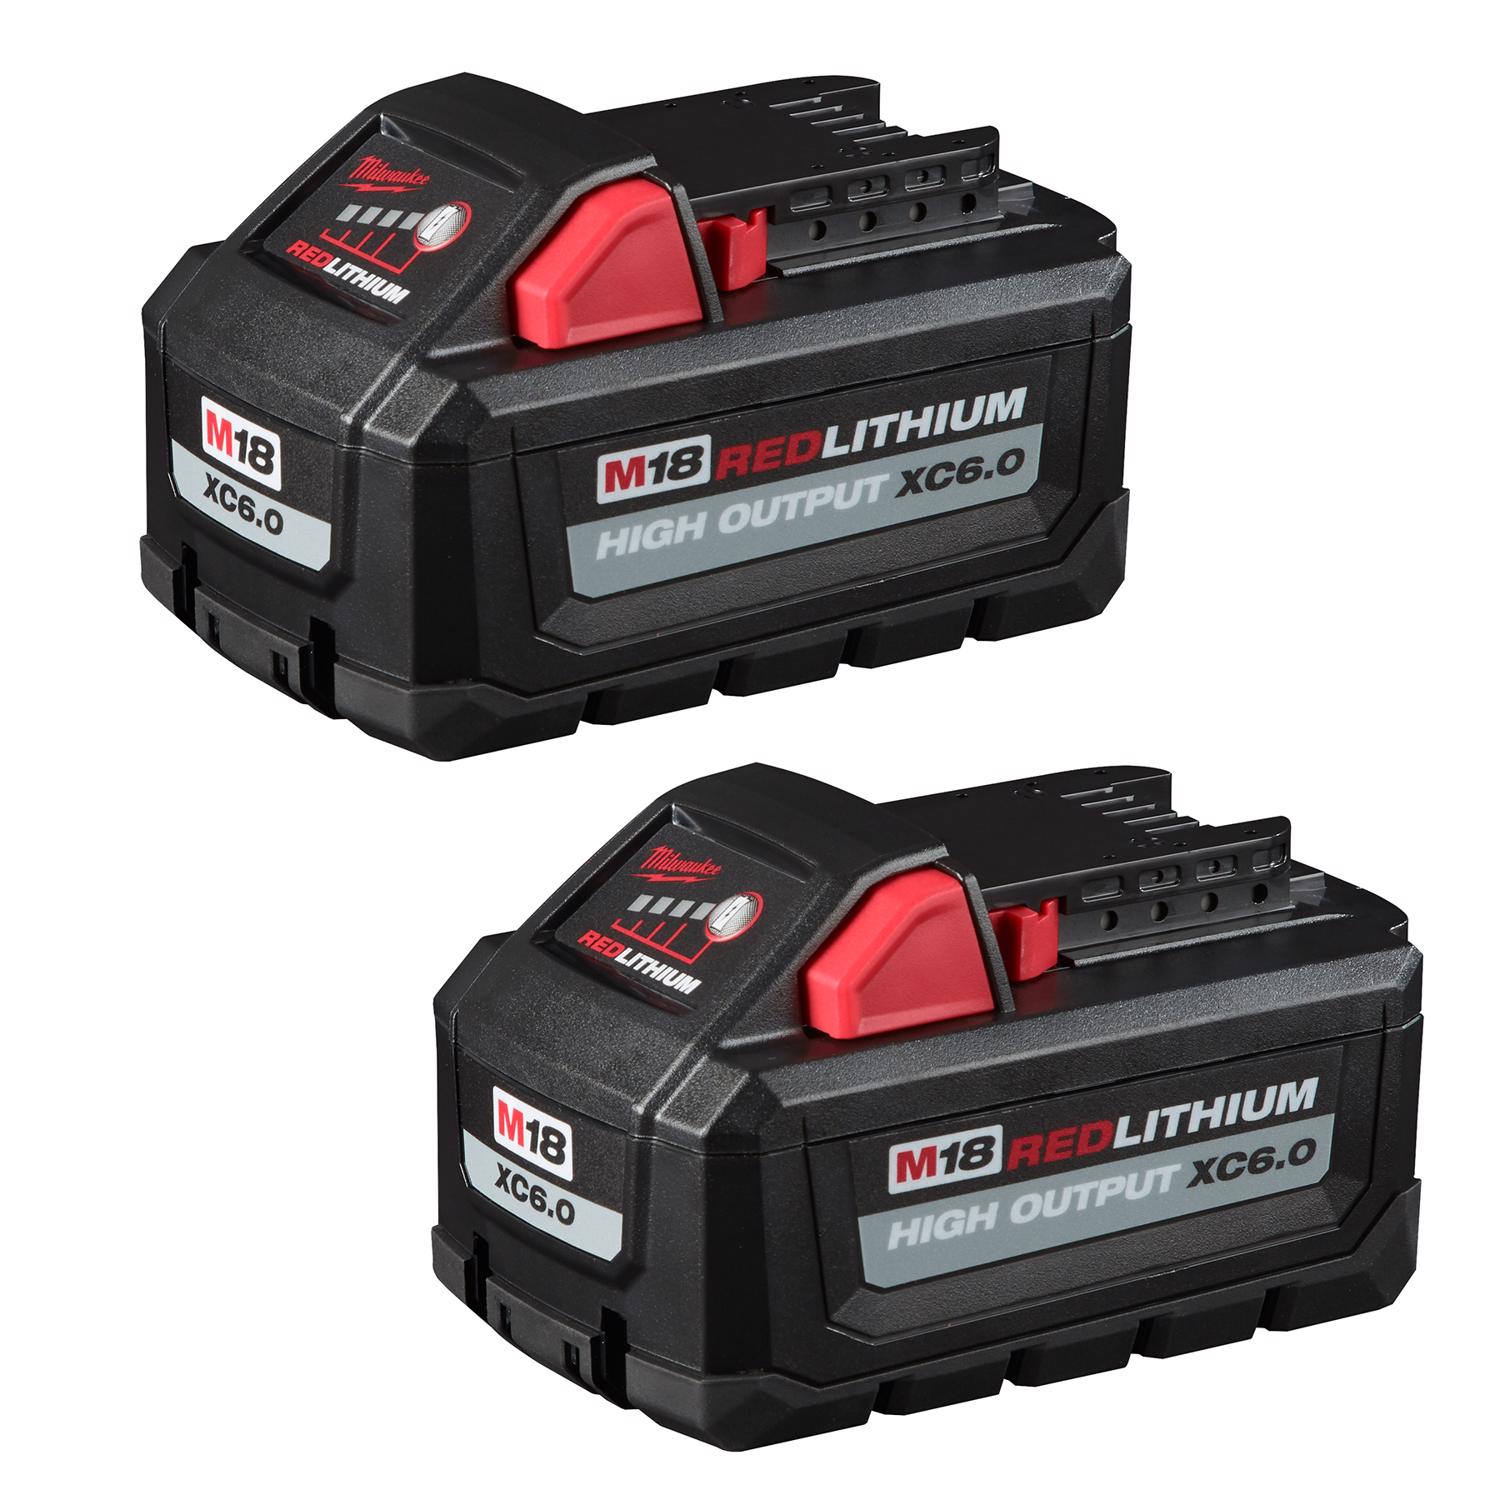 Photos - Power Tool Battery Milwaukee M18 RedLithium XC 6 Ah Lithium-Ion High Output Battery Pack 2 pc 